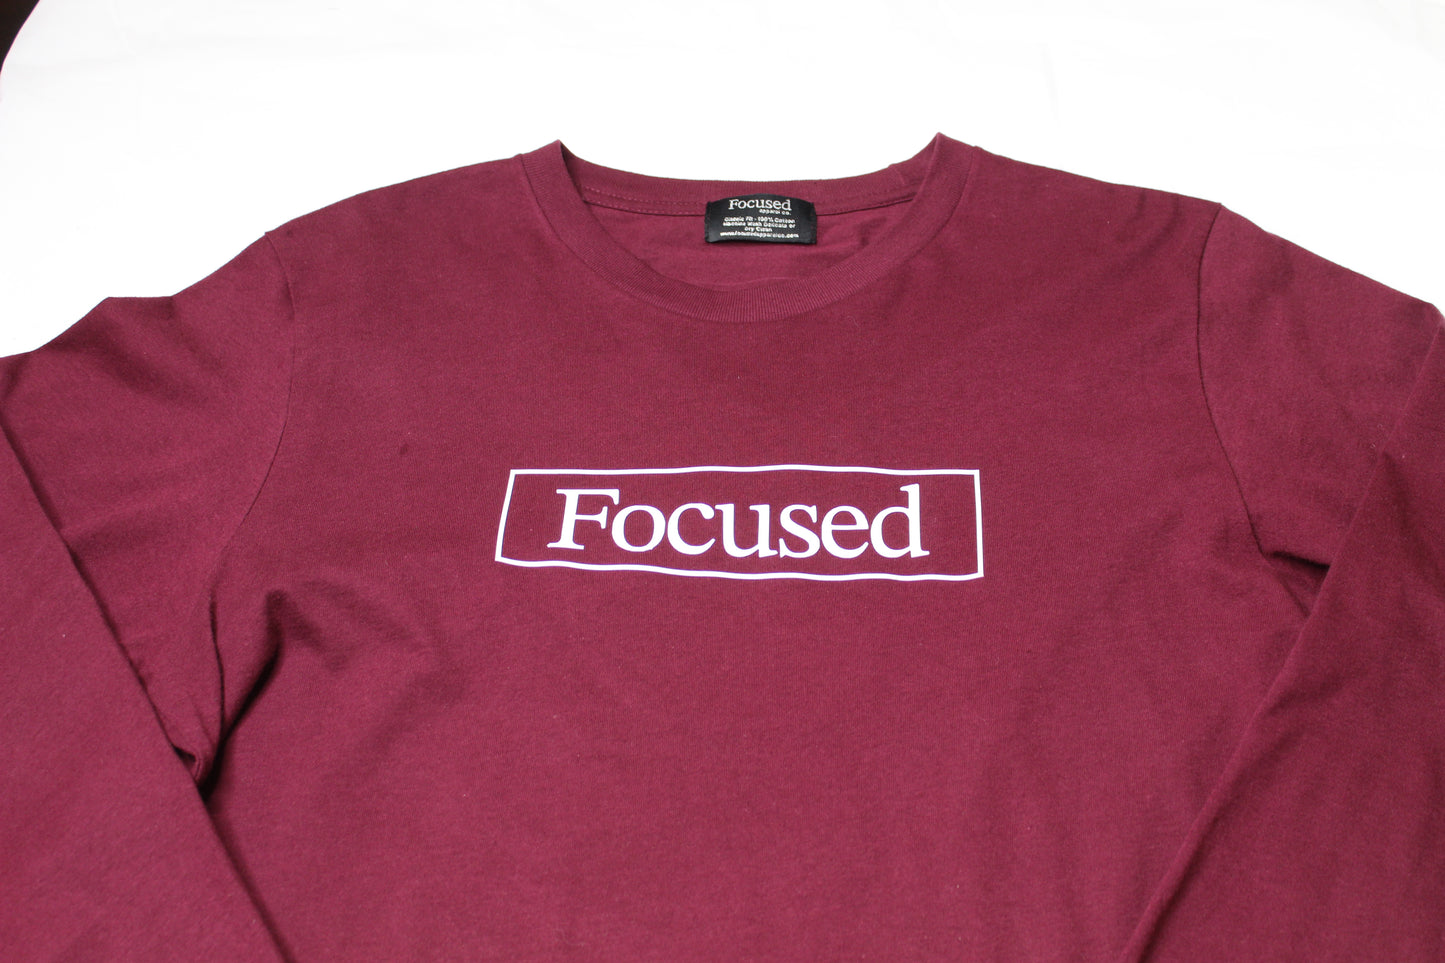 Maroon Long Sleeve Cotton T-Shirt w/ Embossed Raised Print  - All Fits